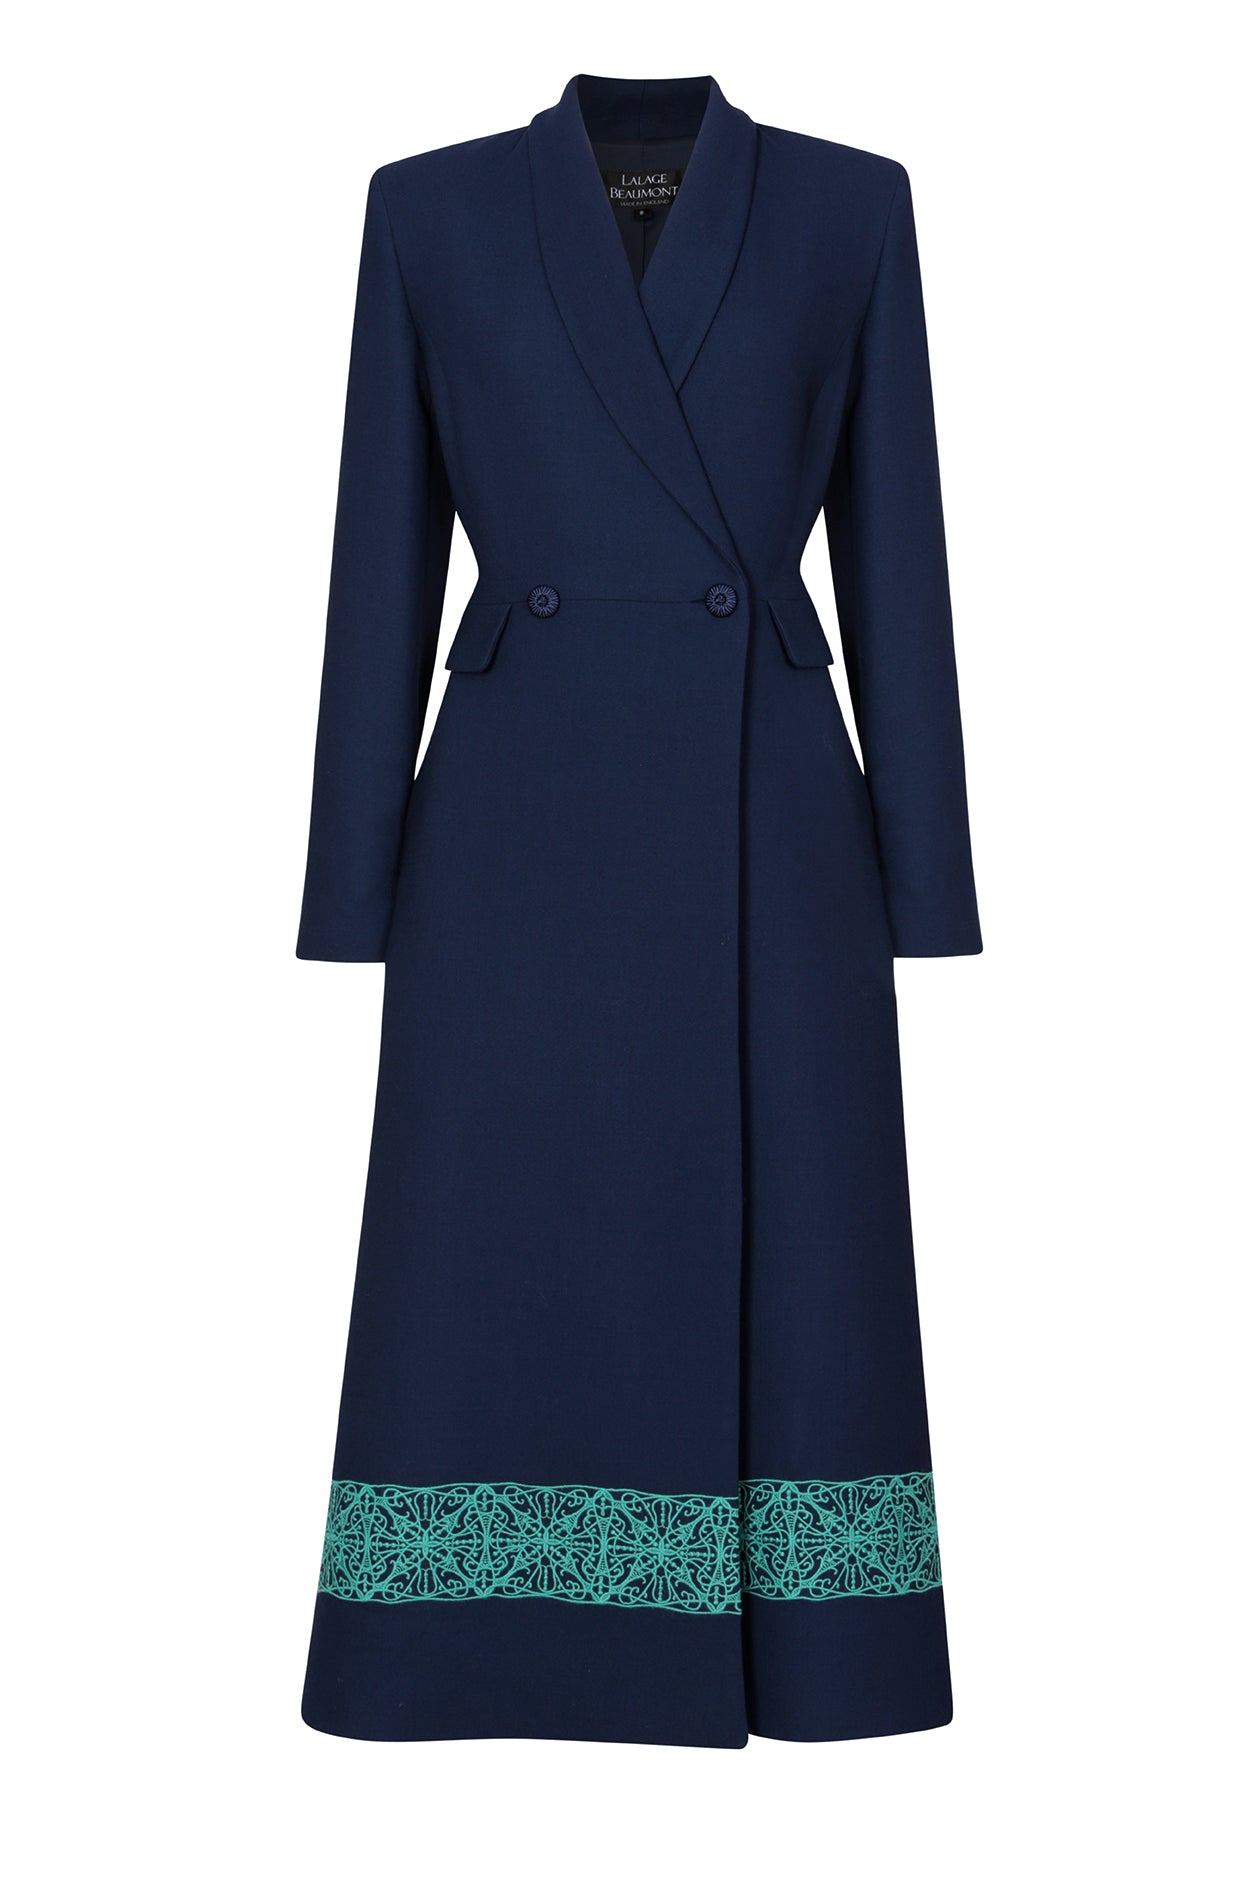 Double-Breasted Coat in Embroidered Navy Faille - Dulcie